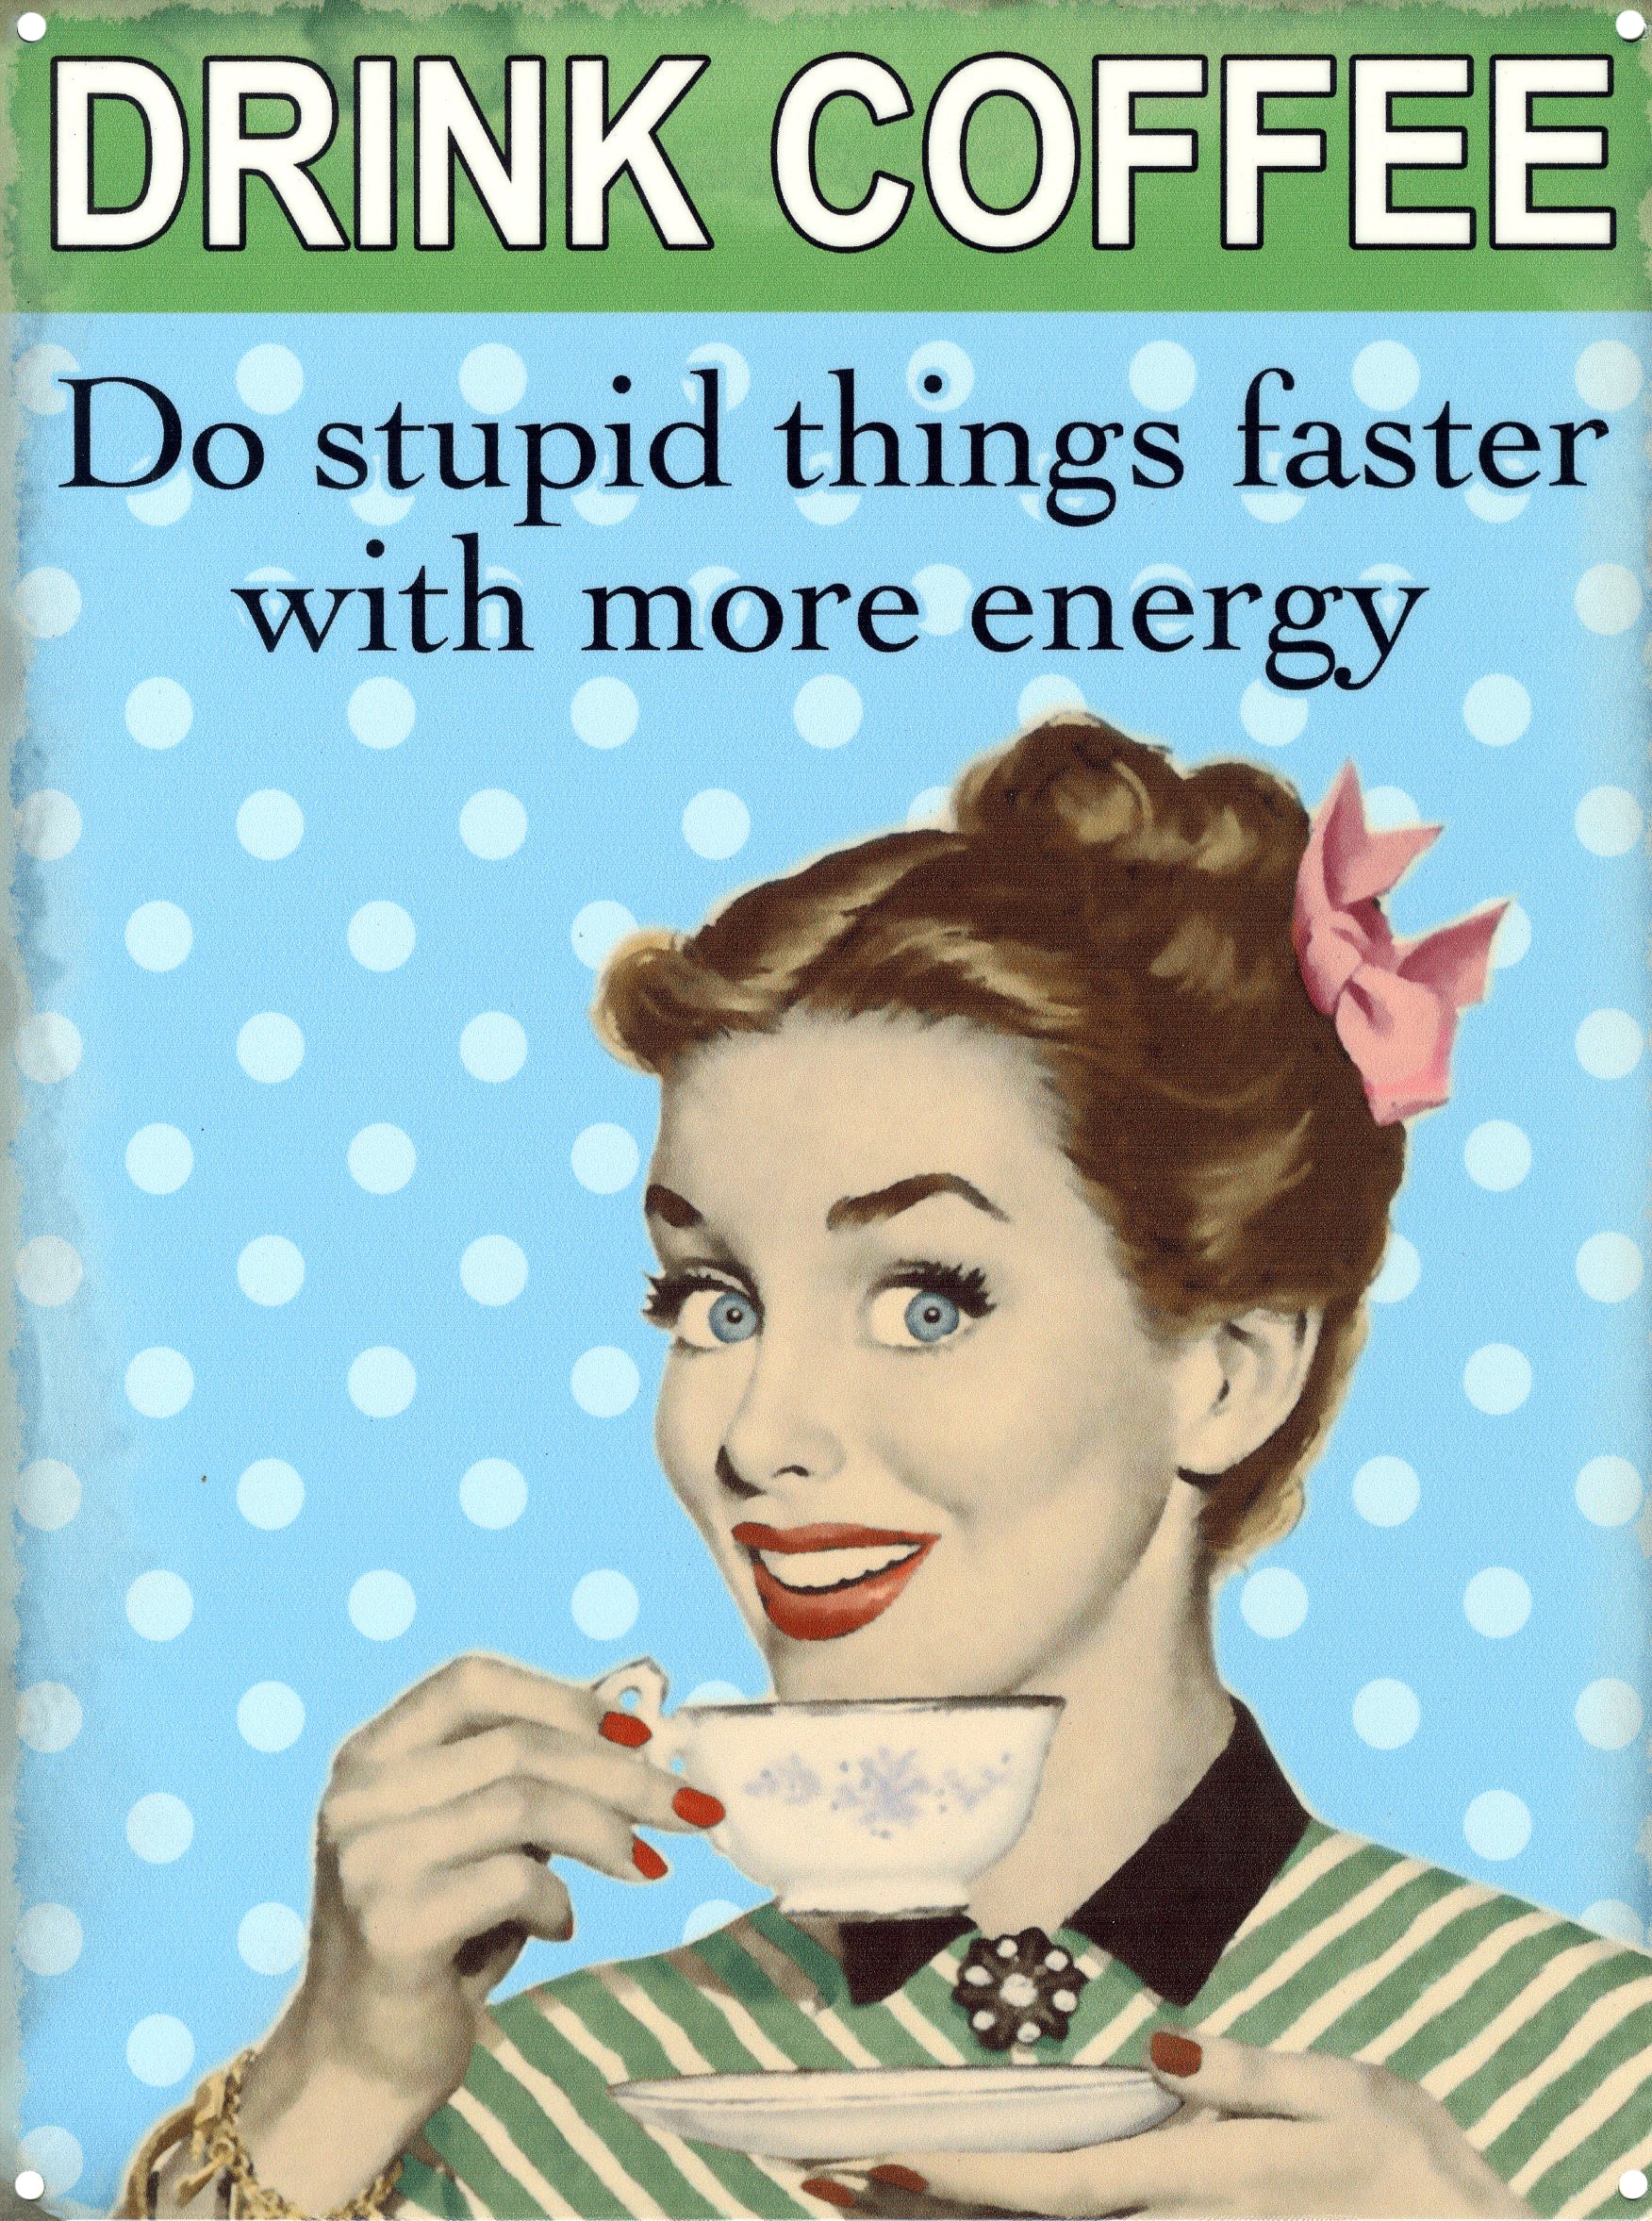 Funny Retro Poster Drink Coffee Do Stupid Things Faster With More Energy -  Ephemera Art Print 